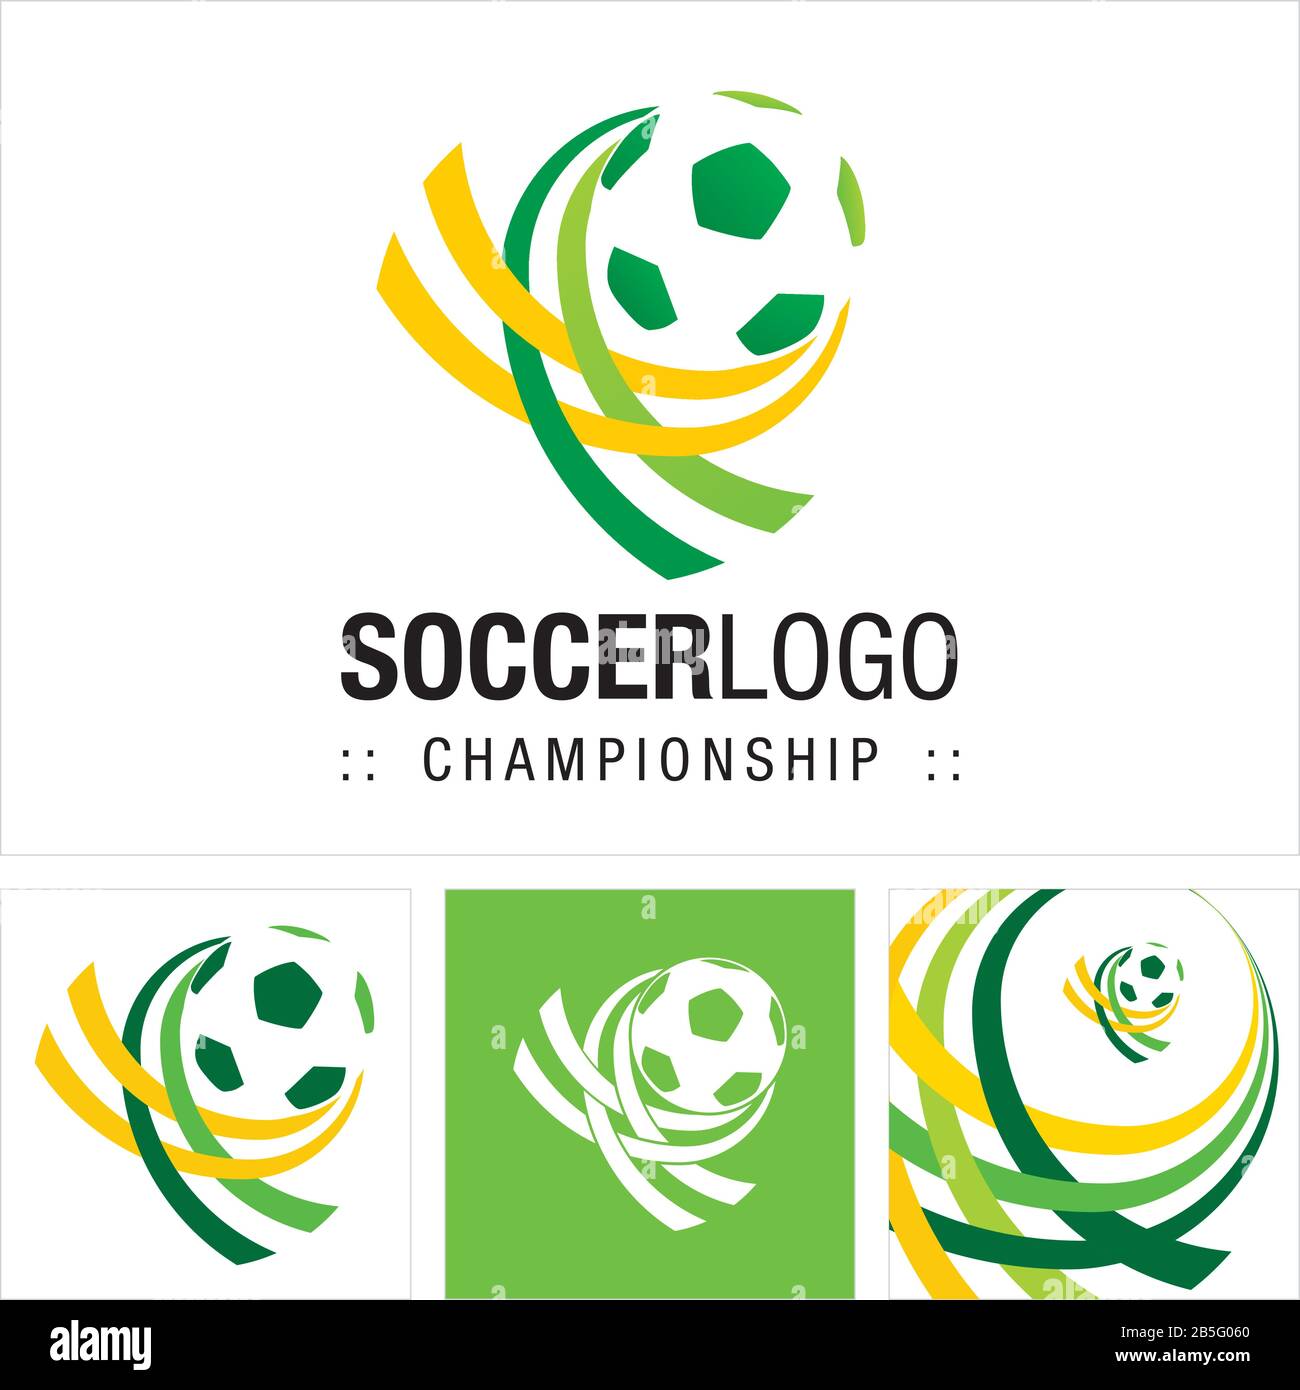 Campeonato Images  Photos, videos, logos, illustrations and